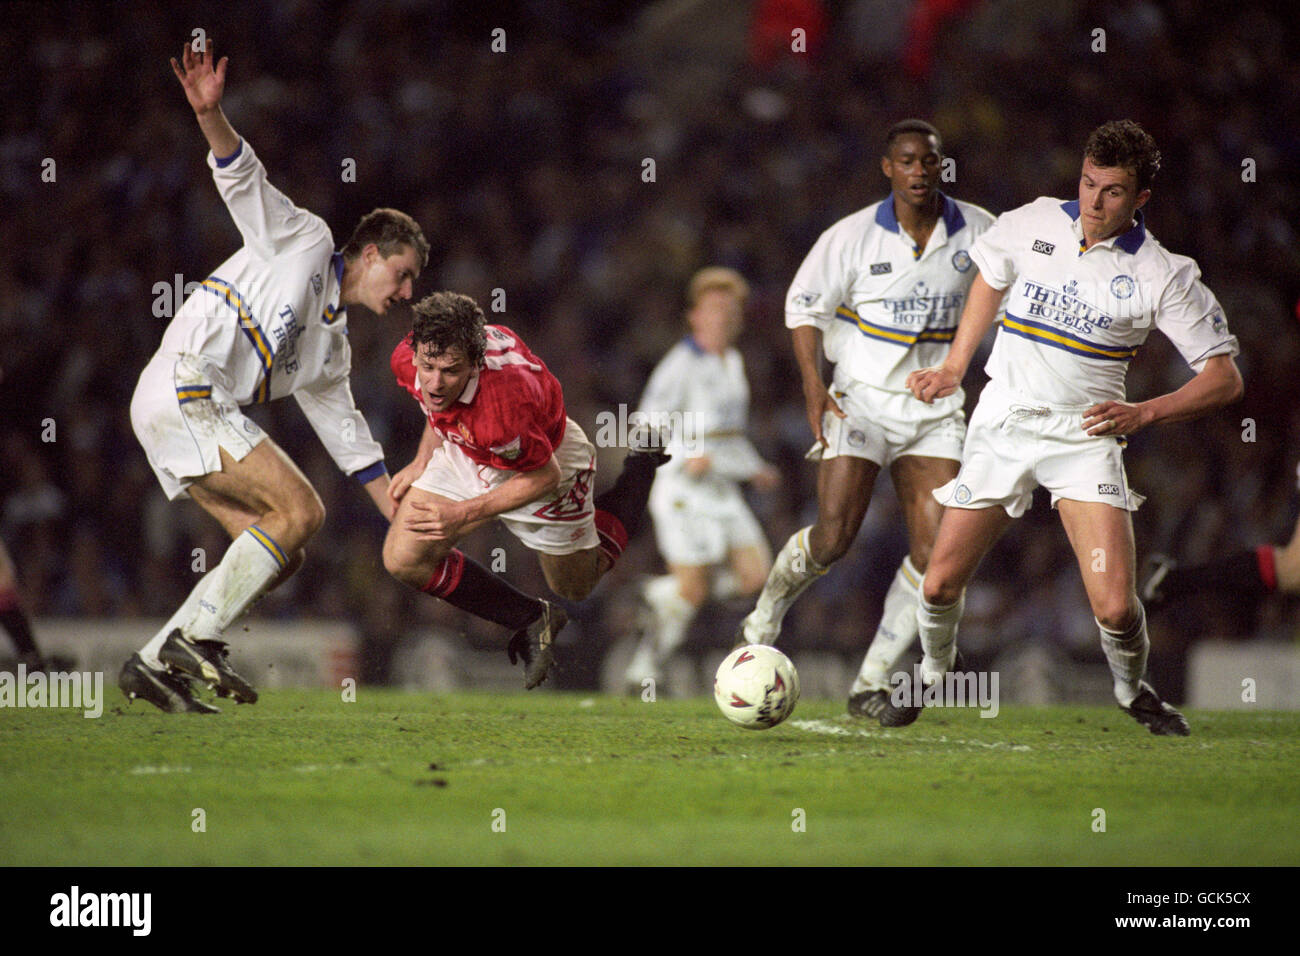 Leeds United defenders David Wetherall (l) and Jon Newsome (far right) help stop Manchester United's Mark Hughes attacking run. Stock Photo